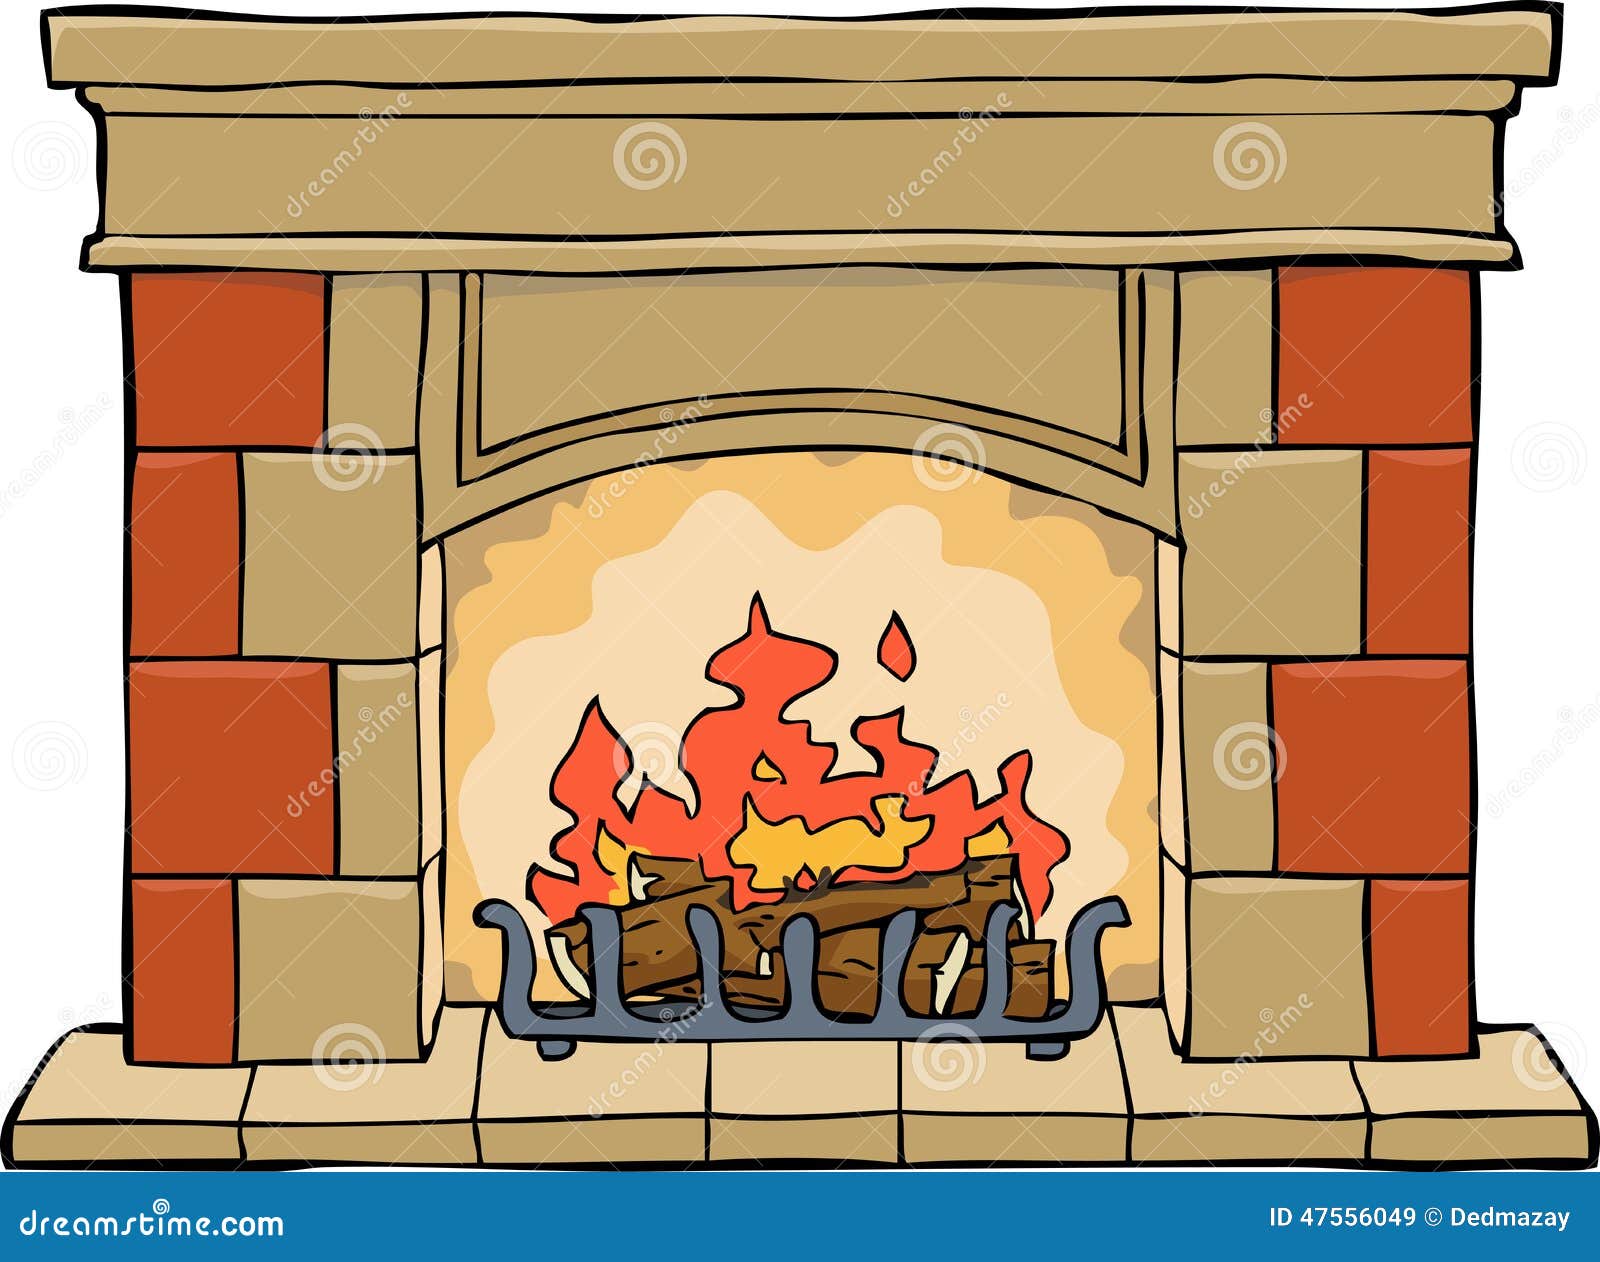 clipart fireplace fire - photo #24